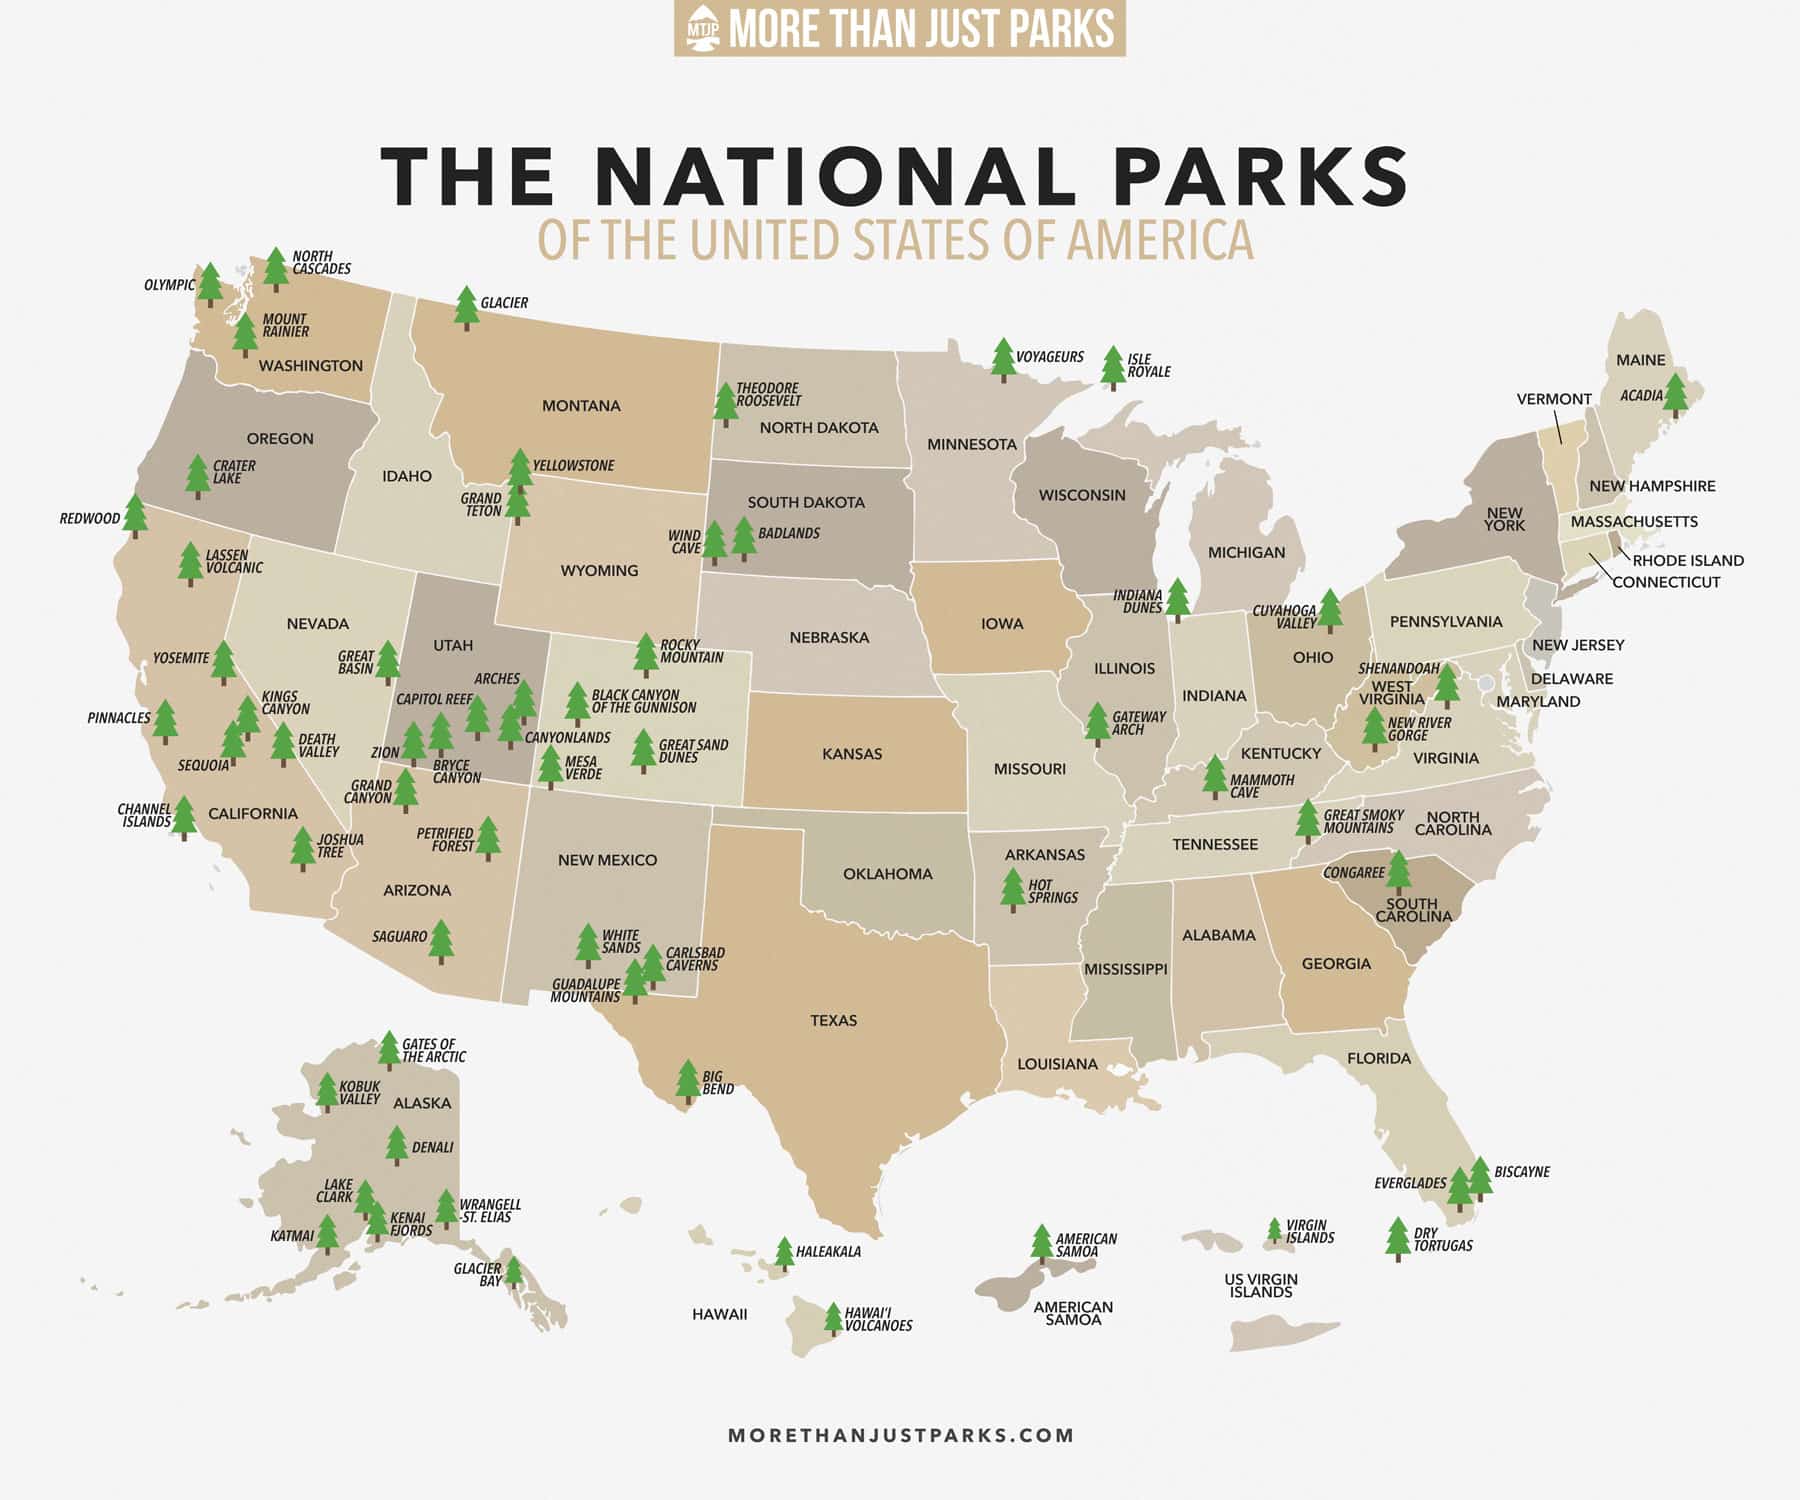 national parks map, map of the national parks, list of the national parks, national parks map, national parks map, national park map